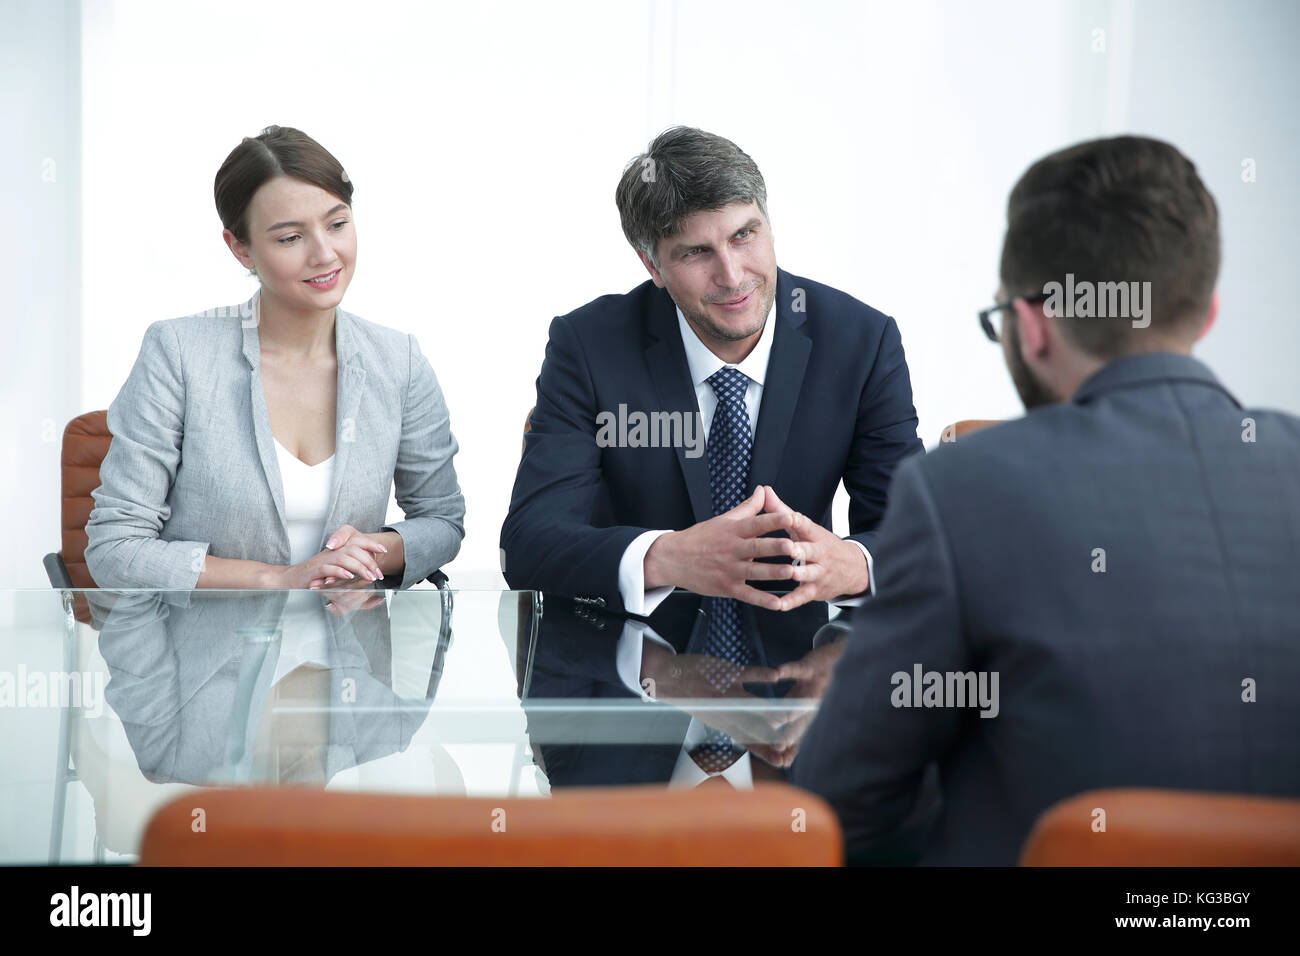 concept of partnership. jurists are discussing a contractual agreement. Stock Photo